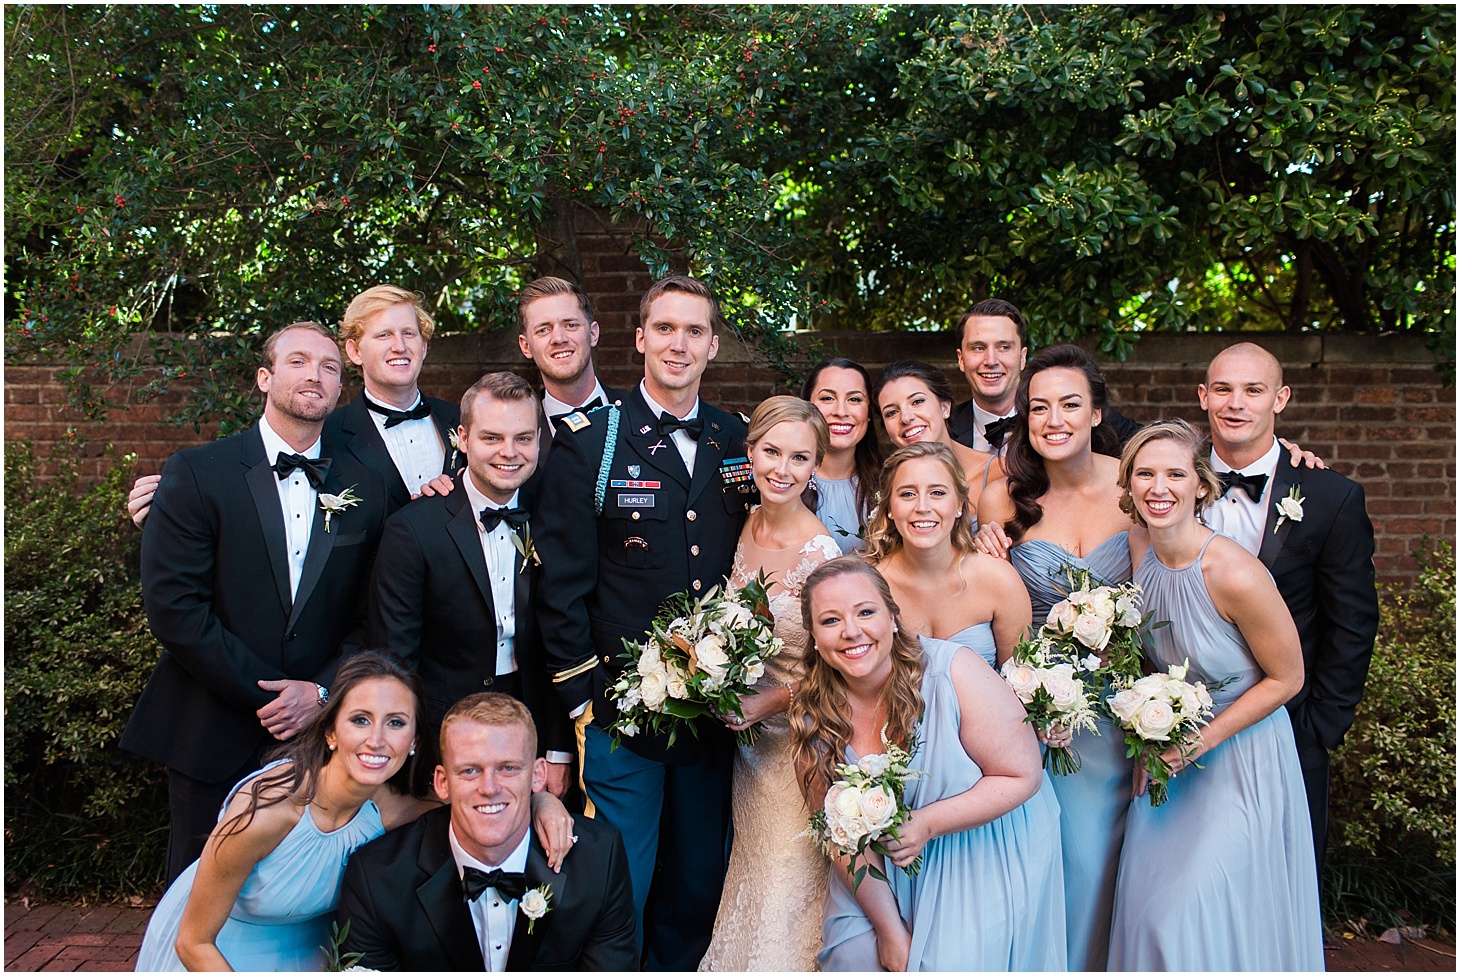 Bridal Party at Old Presbyterian Meeting House | Southern Black Tie wedding at St. Regis DC in Dusty Blue and Ivory | Sarah Bradshaw Photography